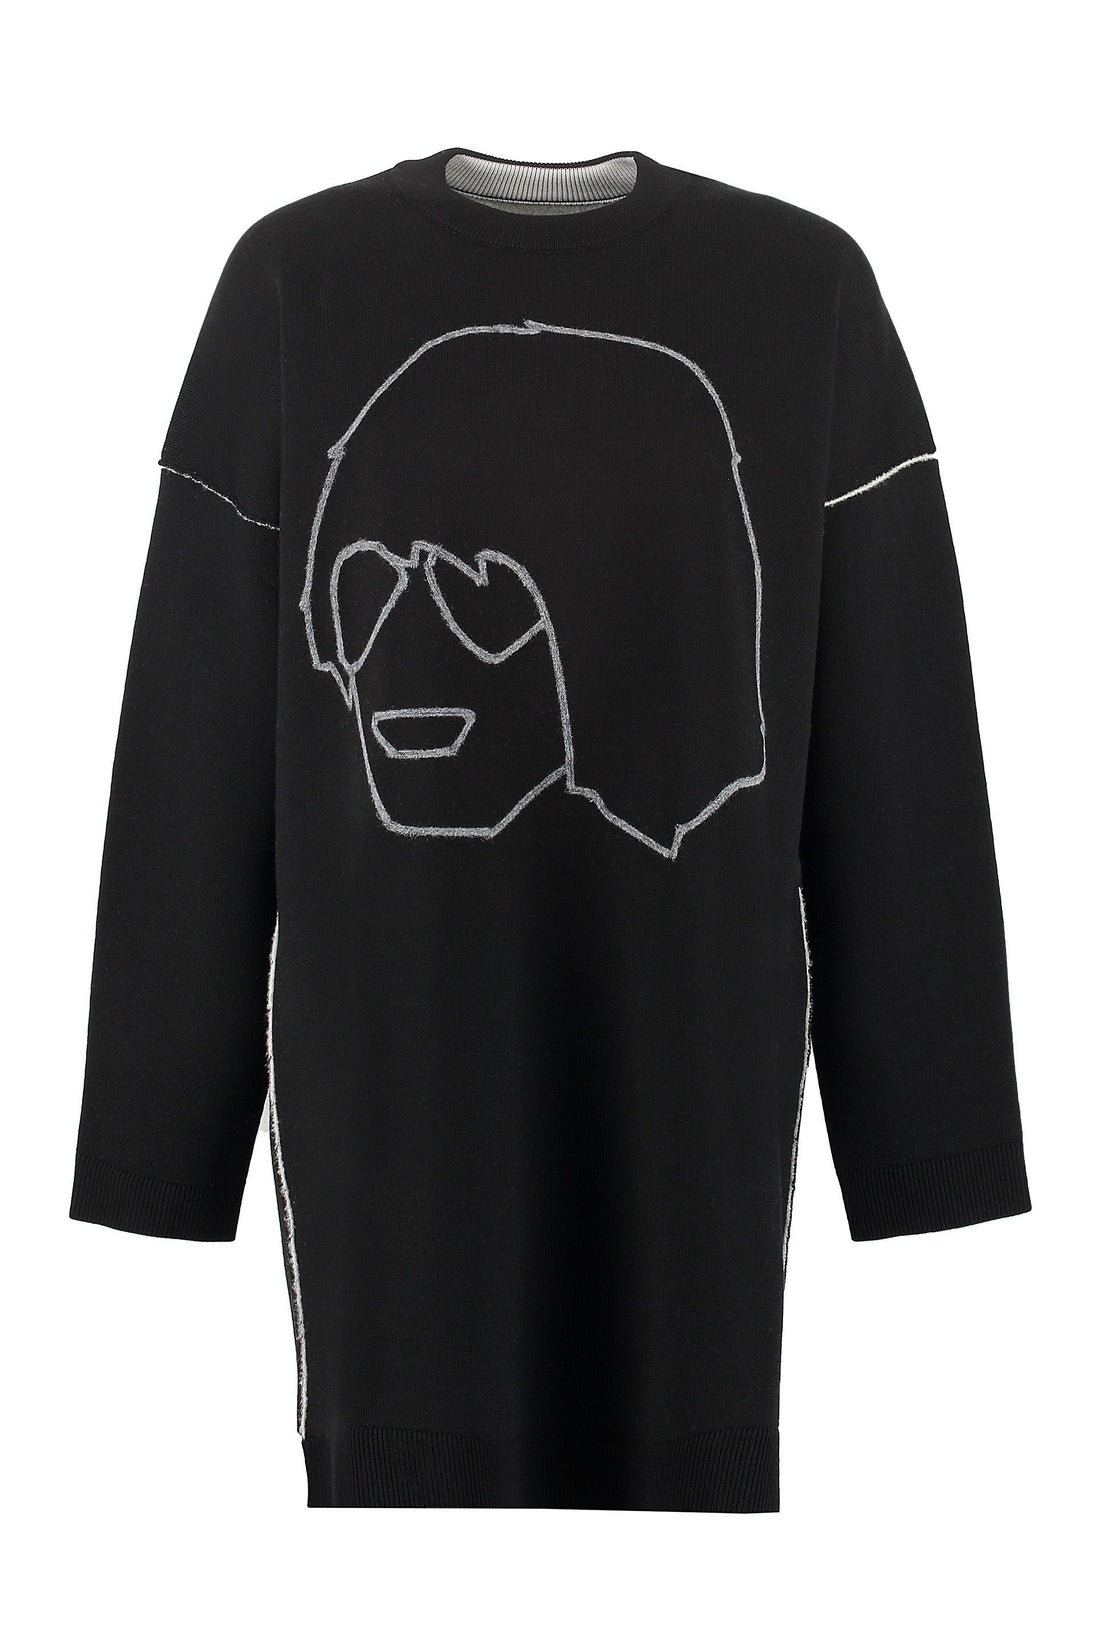 Kenzo-OUTLET-SALE-Embroidered oversize sweater-ARCHIVIST